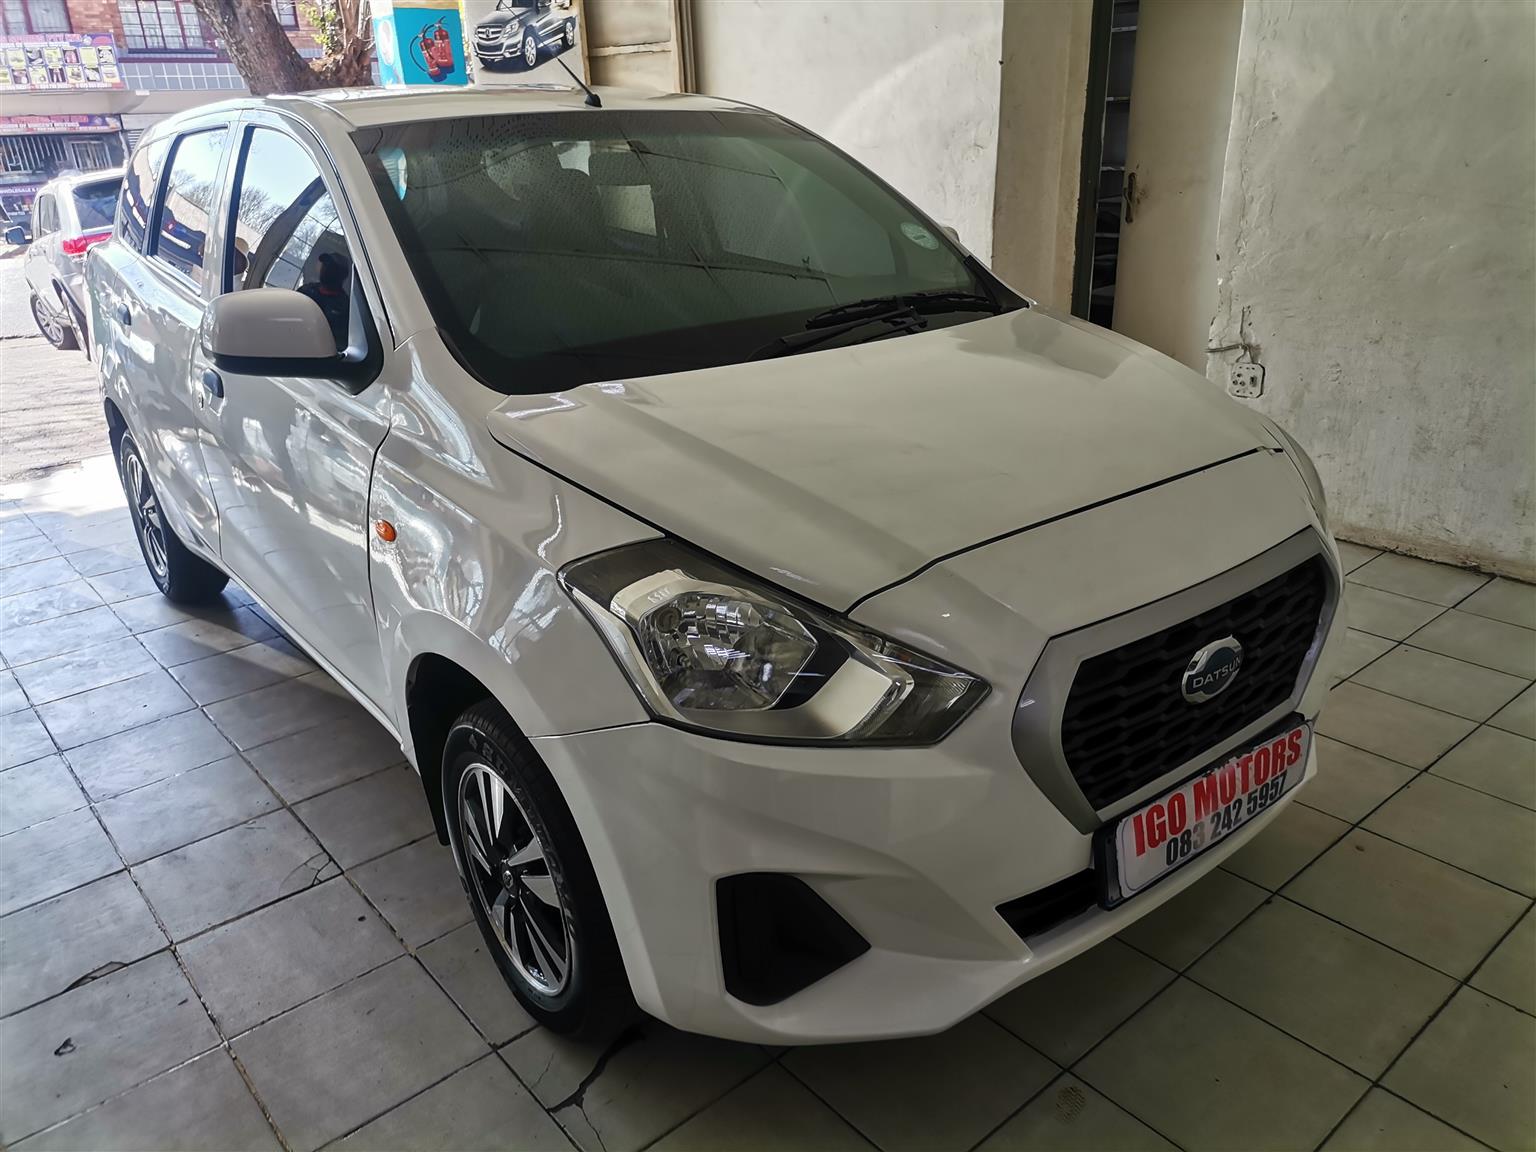 2021 DATSUN GO + 1.2Lux MANUAL 73000KM Mechanically perfect with Clothes Seat